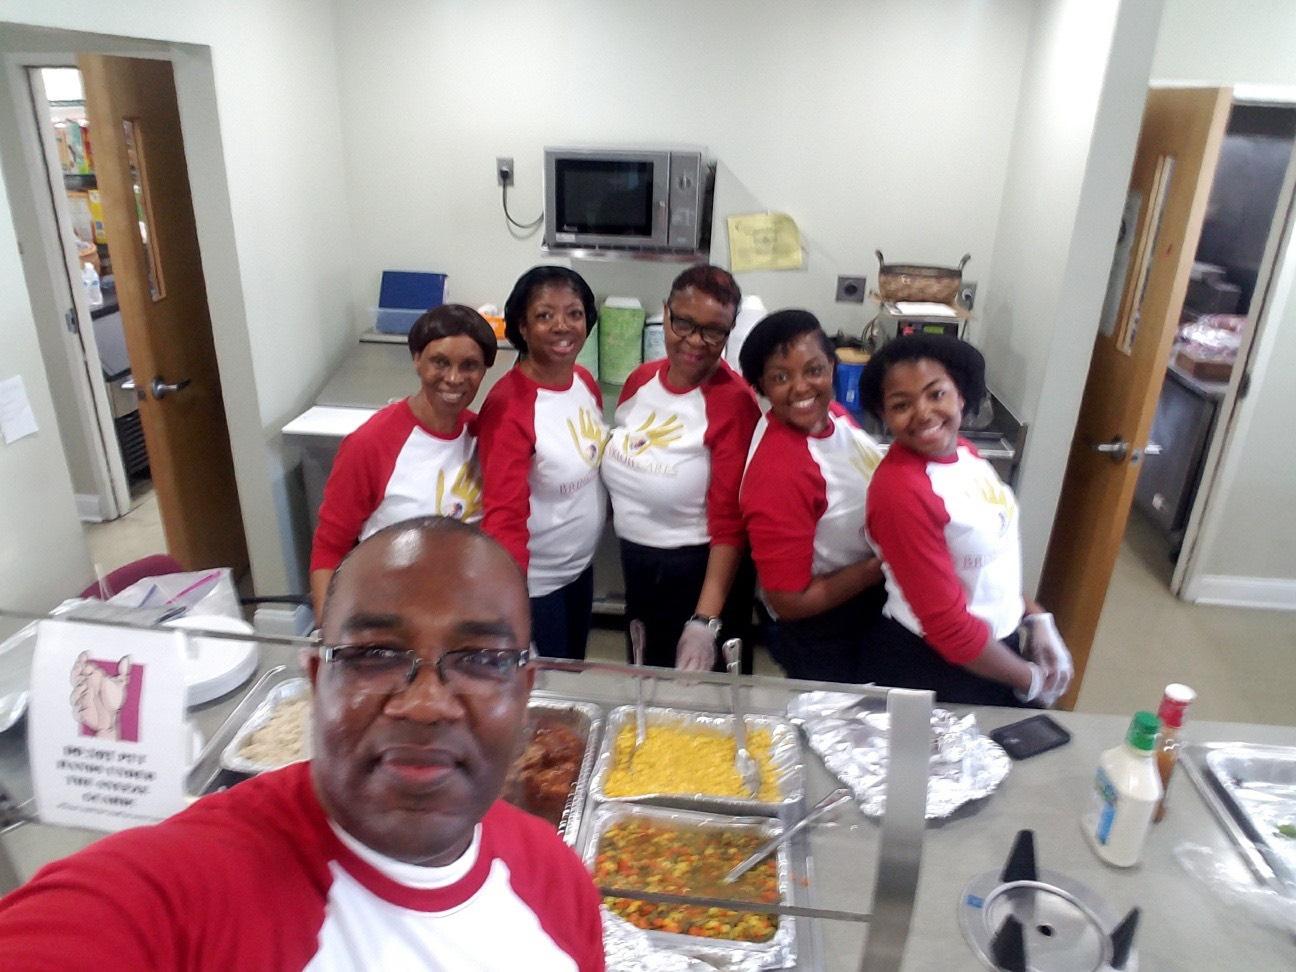 At several outreach events Brinklow members are ready to serve samples of health vegetarian cooking. 